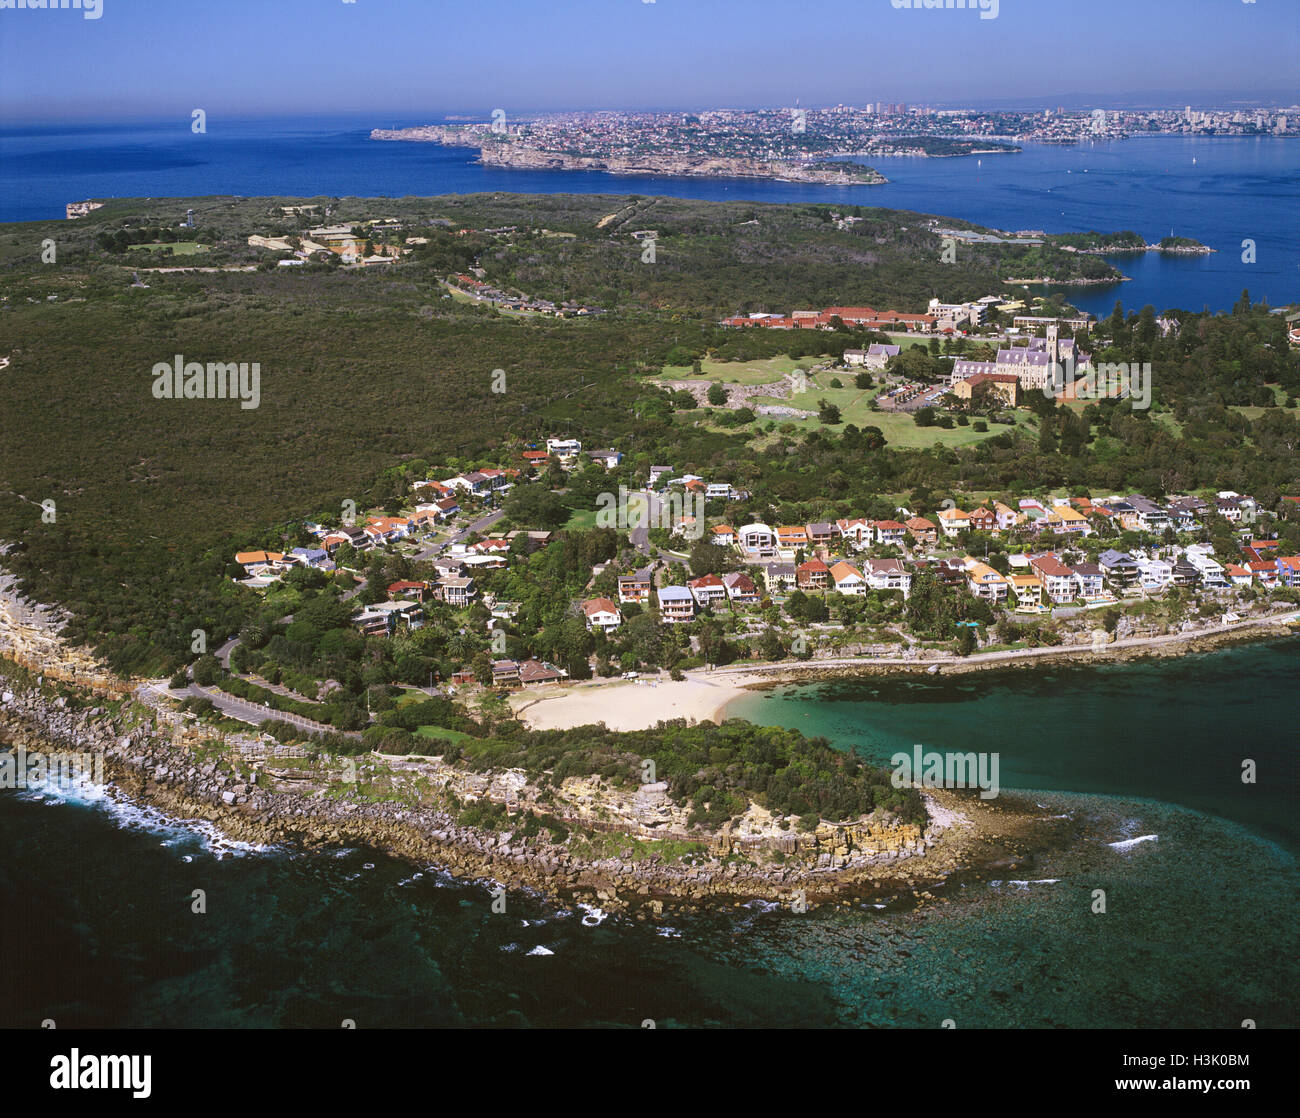 Shelly Beach, North Head and the city in the background. Stock Photo